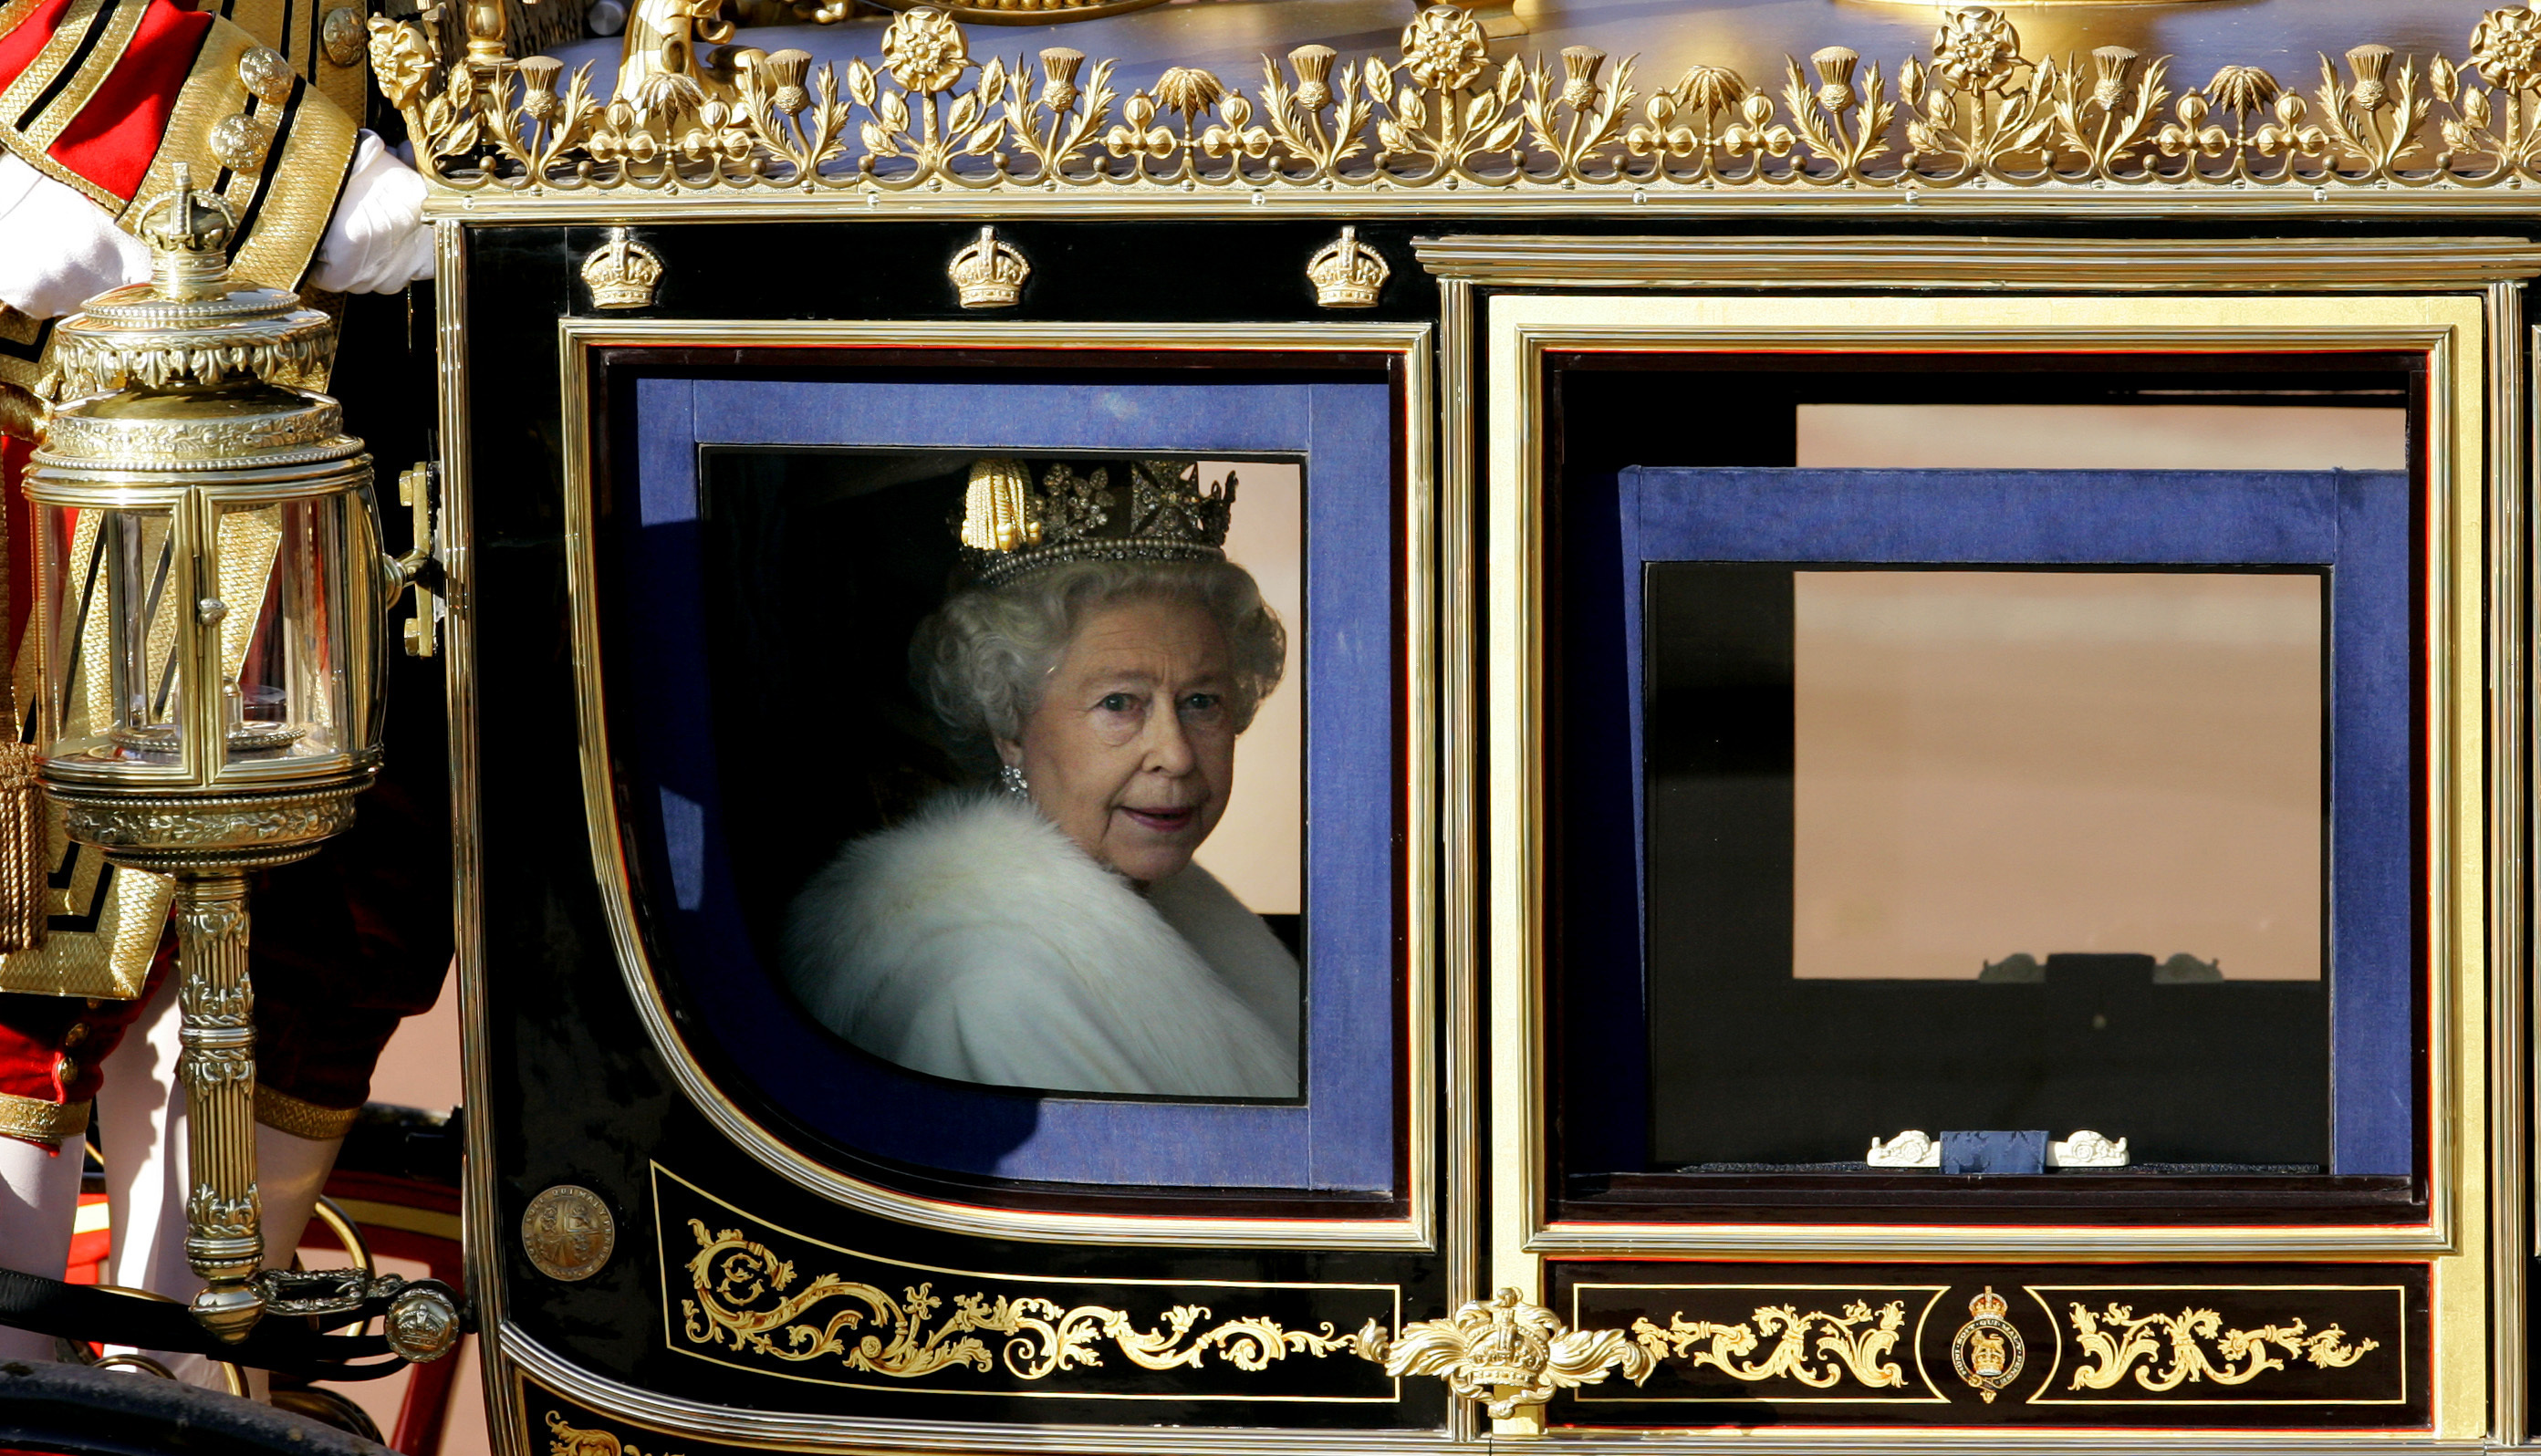 Britain's Queen Elizabeth II leaves Buckingham Palace in a carriage to attend the State opening of Parliament in London, Nov. 6, 2007. (AP Photo/Kirsty Wigglesworth)